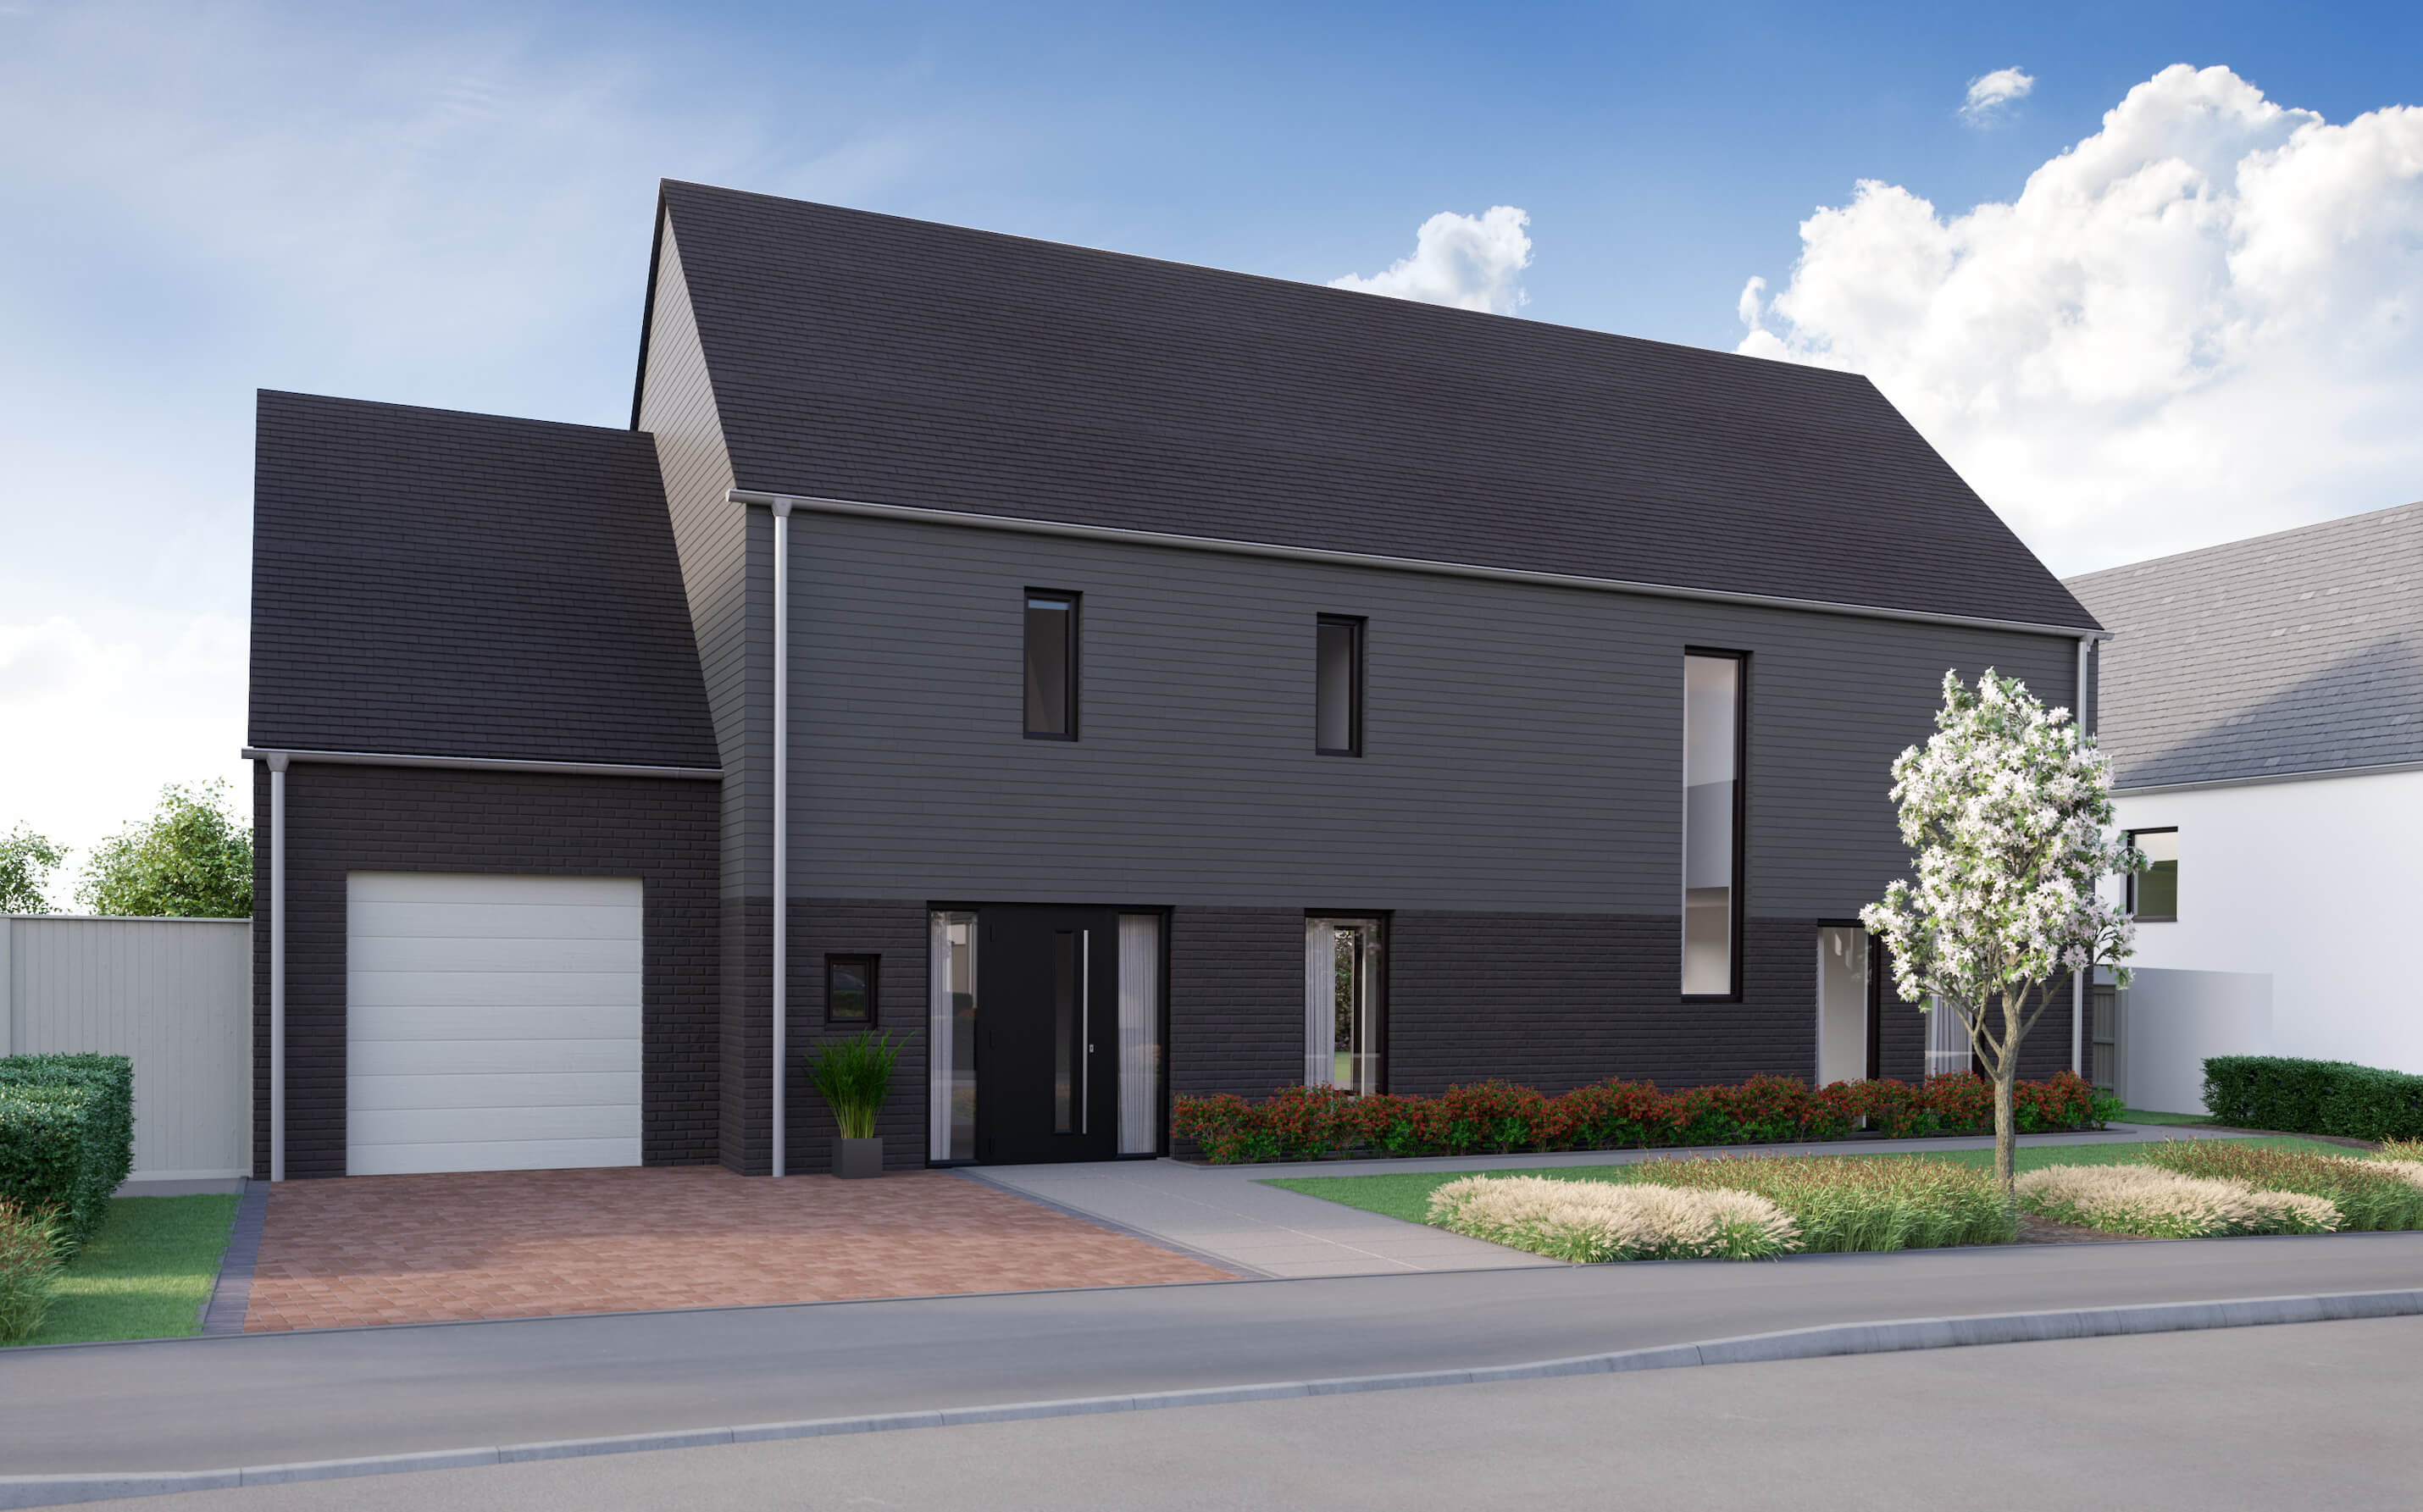 Introducing Our Newest Property Available at Forge Weir View